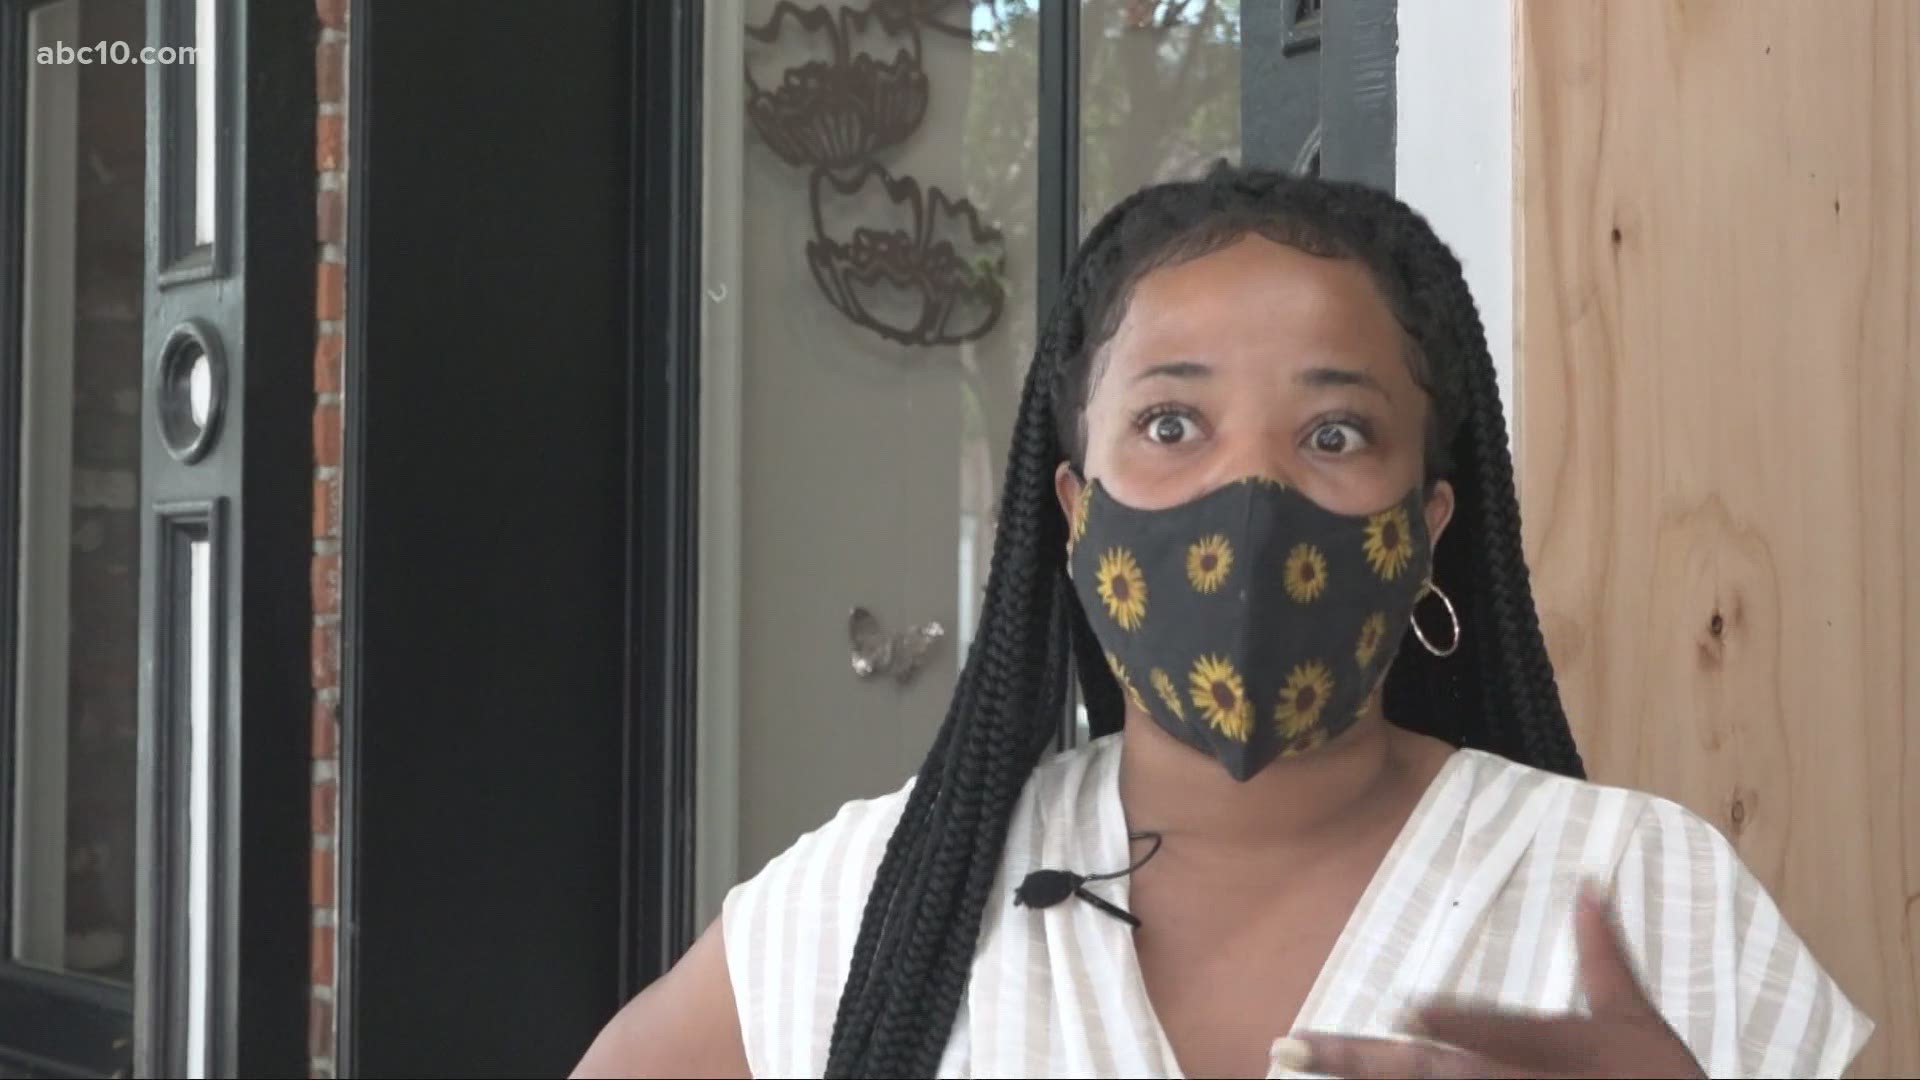 An Old Sacramento business owner explained to Monica Coleman what happened during an attack on her business.